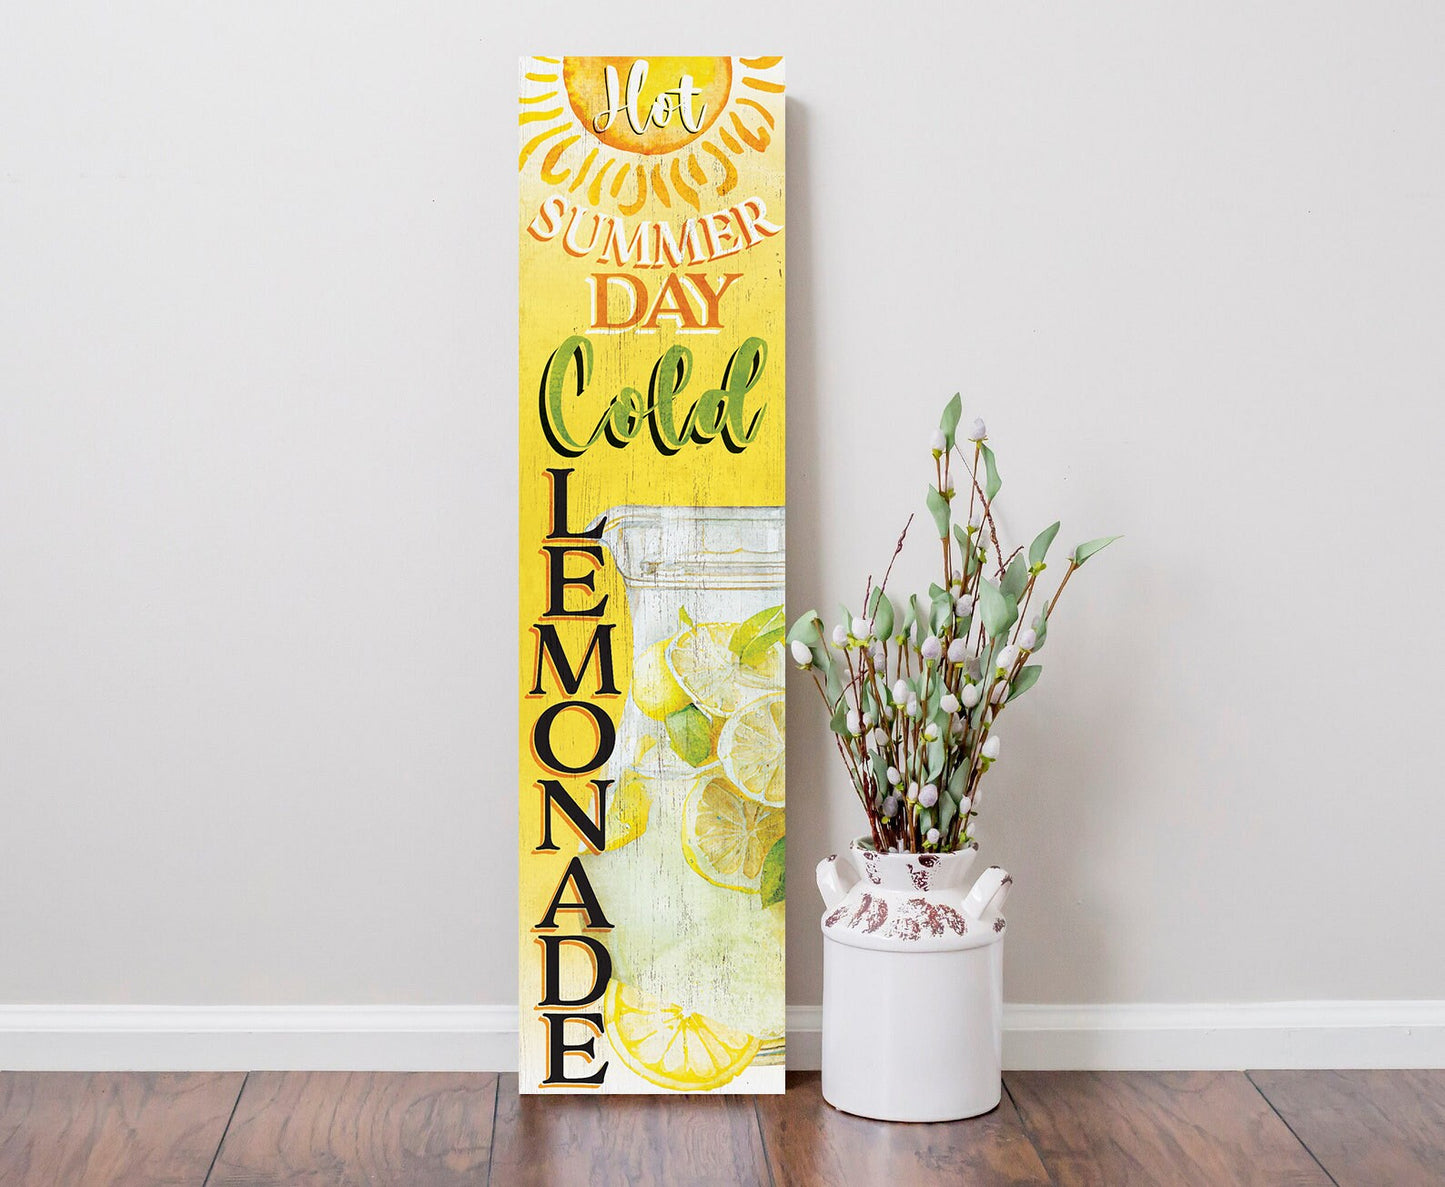 36in "Hot Summer Day, Cold Lemonade" Porch Sign - Refreshing Front Door Decor for Sun-Soaked Seasonal Display